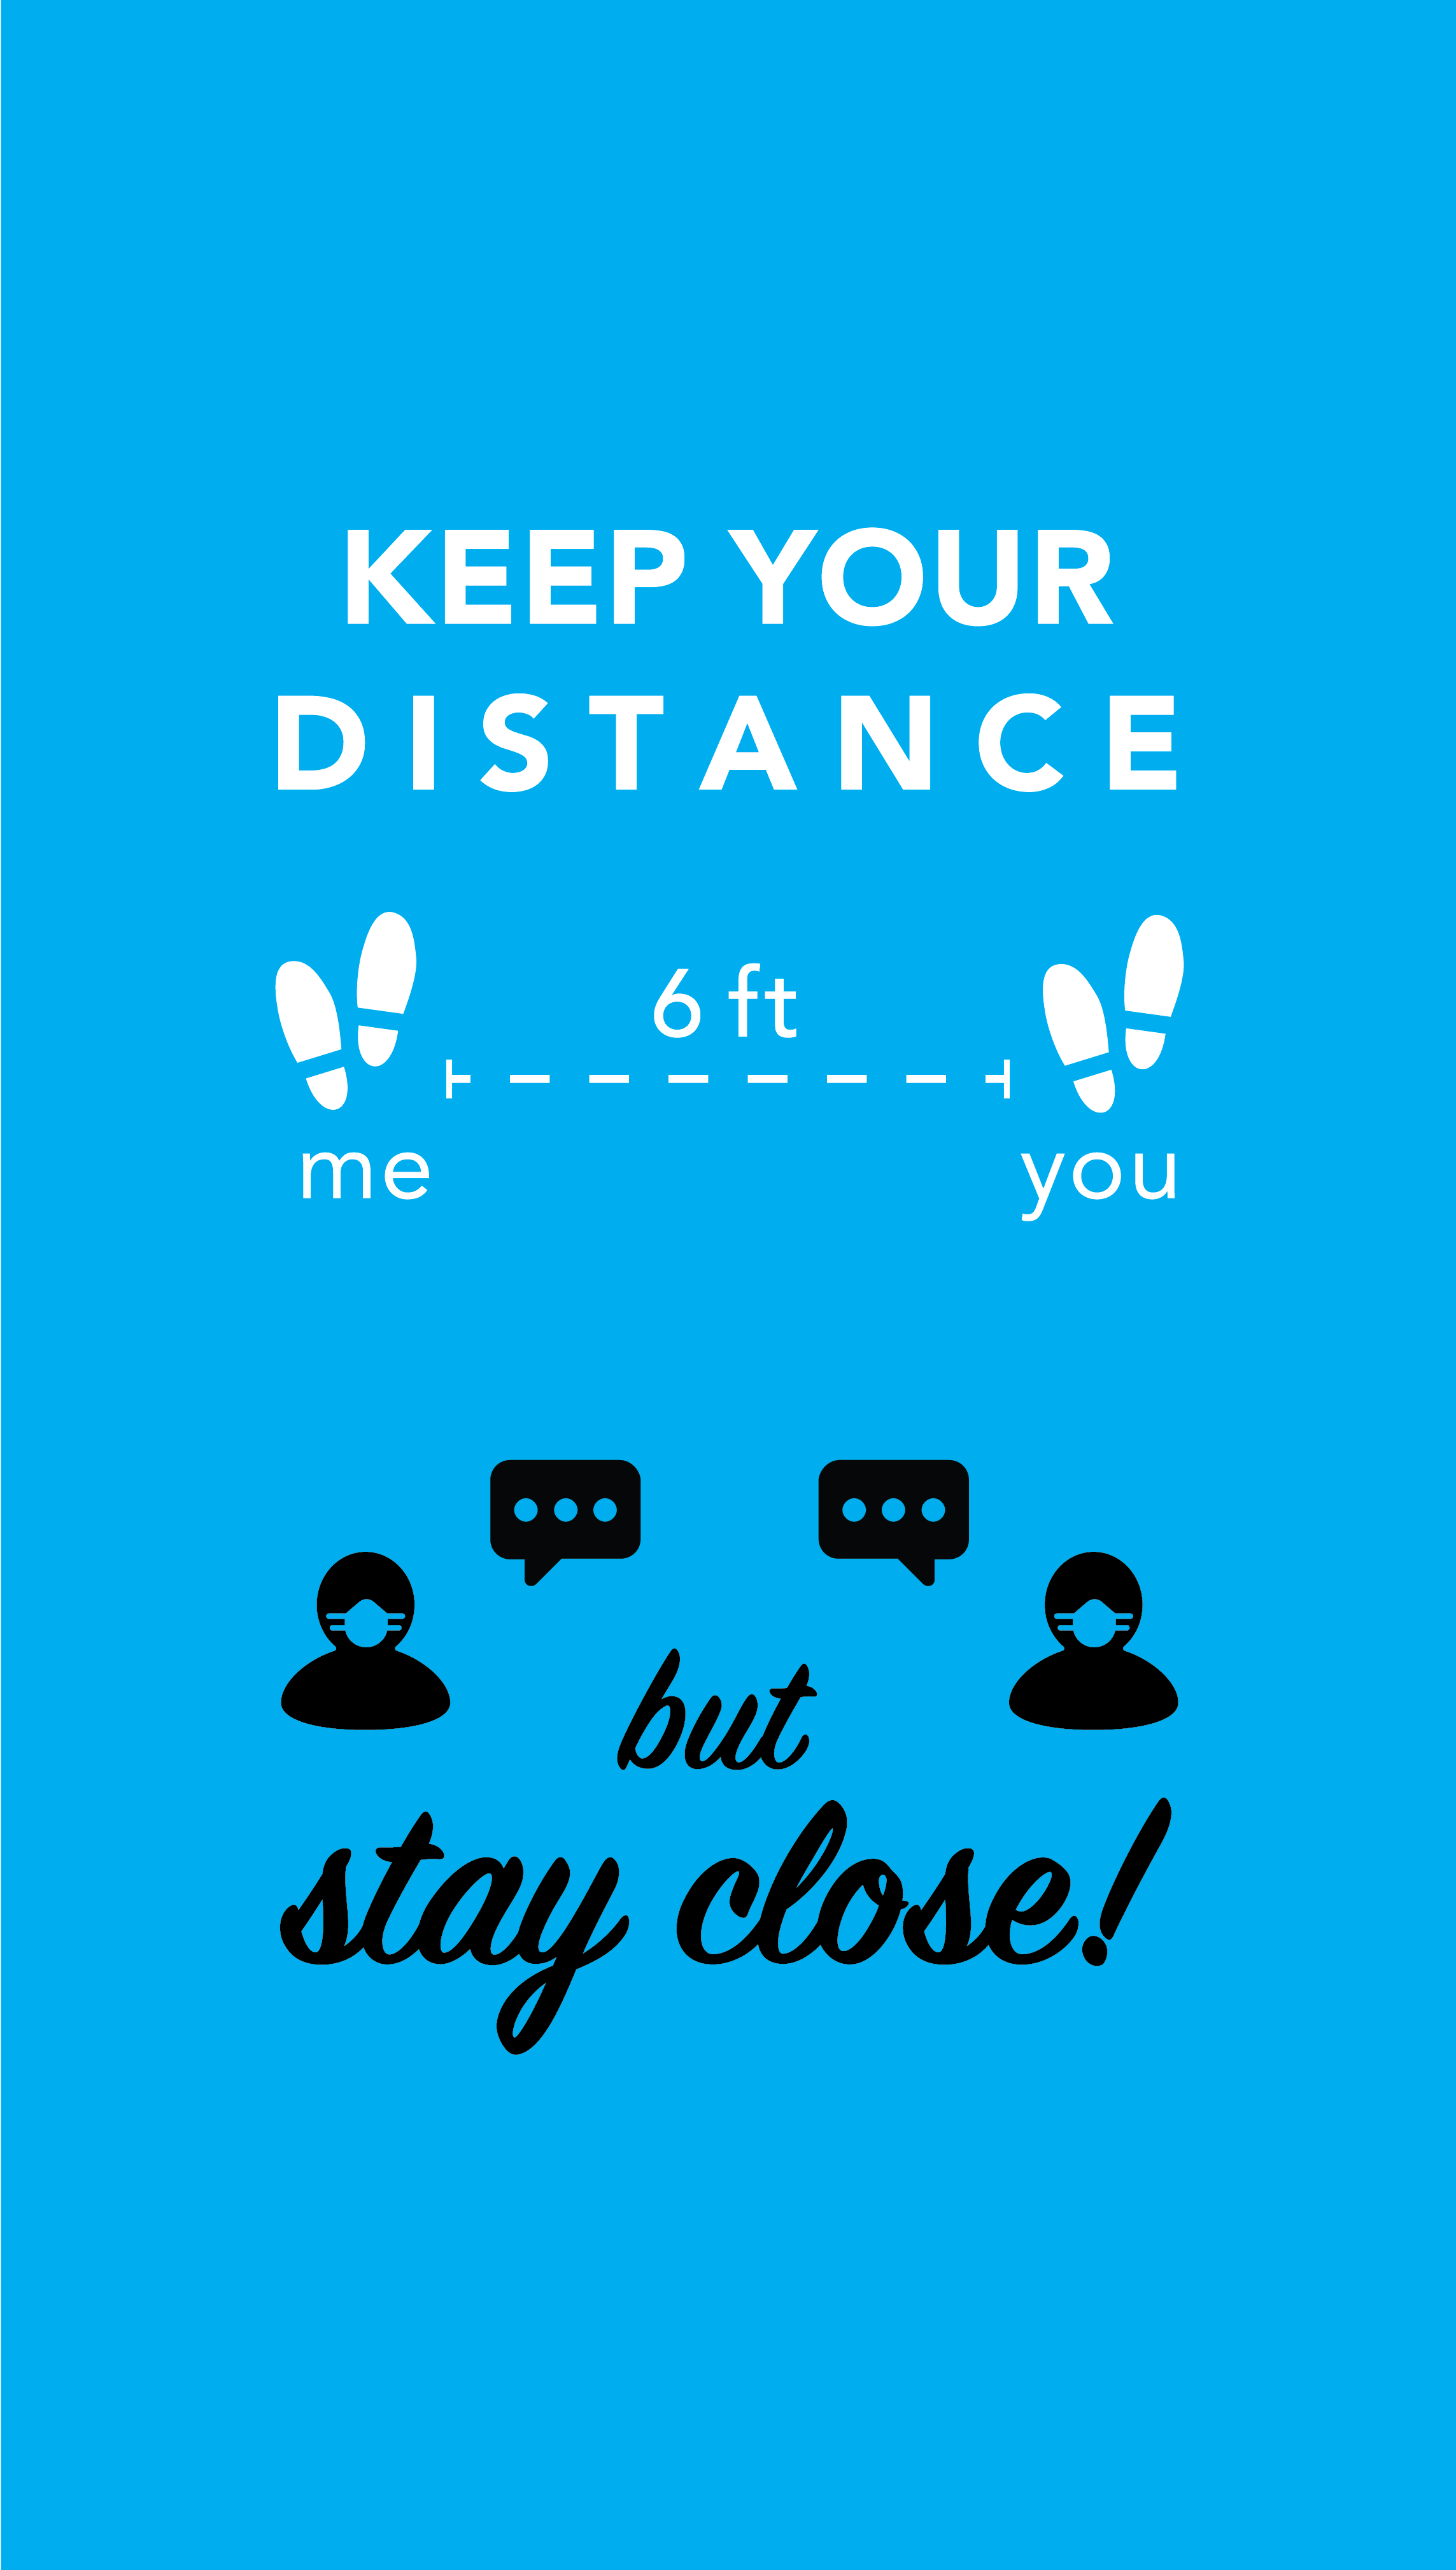 Keep your distance but stay close